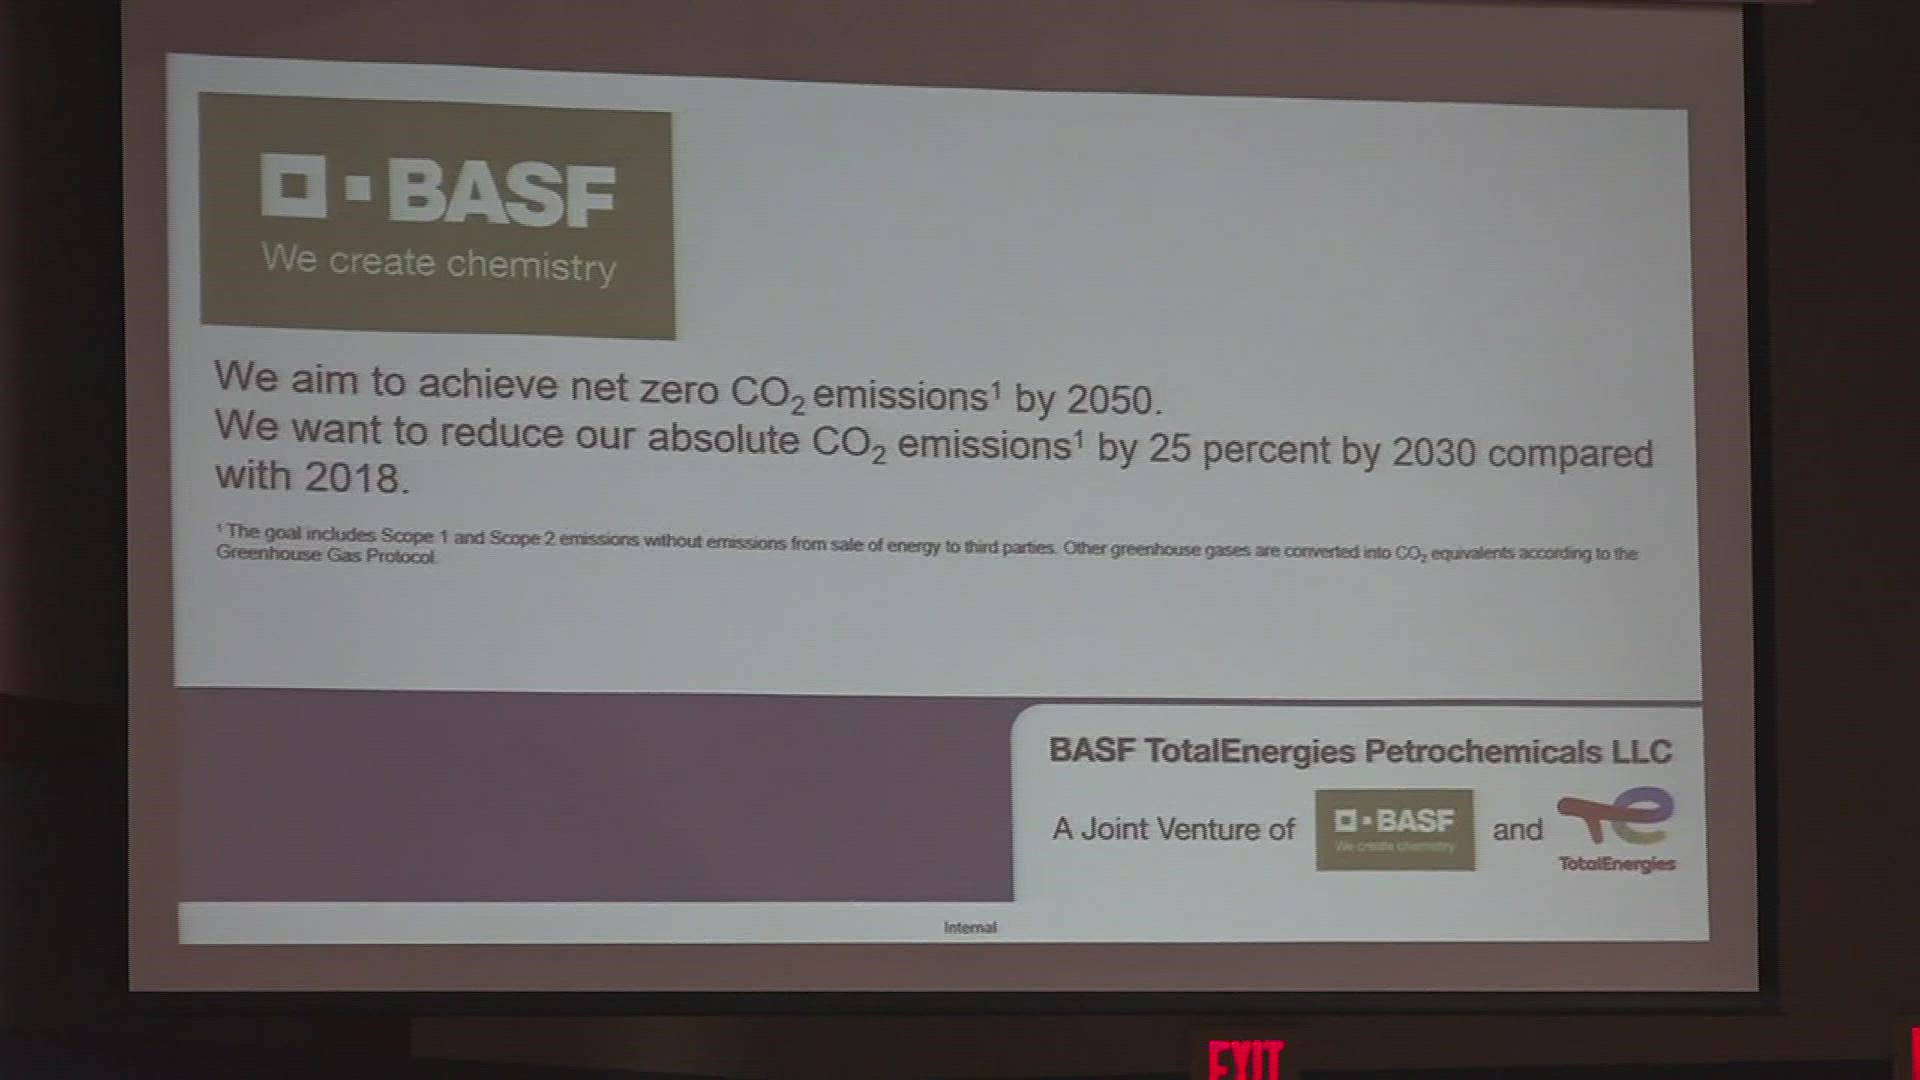 BASF is aiming to hit net zero CO2 emissions by 2050.